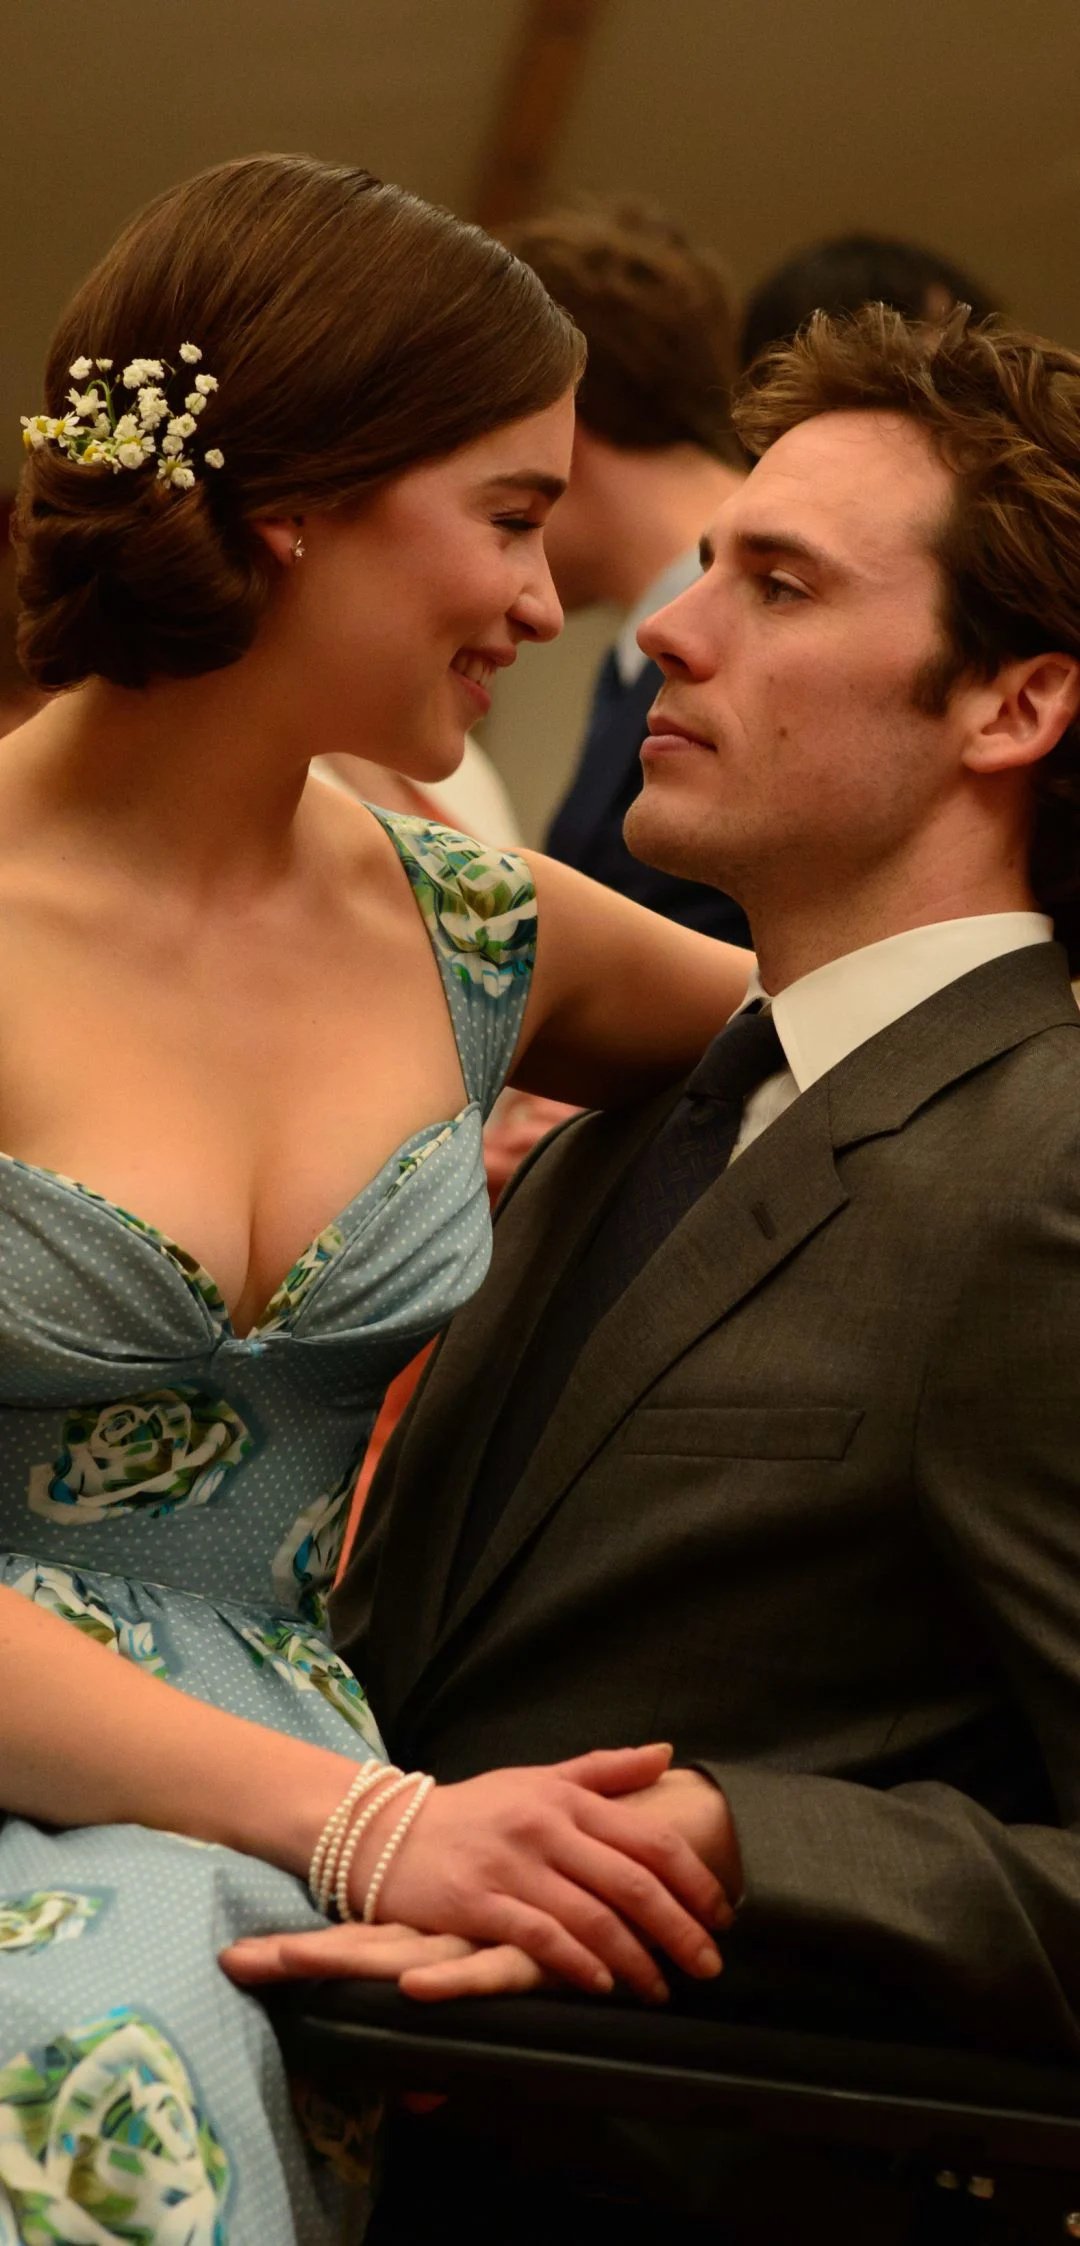 Me Before You (Movie), Top free wallpapers, Charming imagery, Romantic storyline, 1080x2250 HD Phone